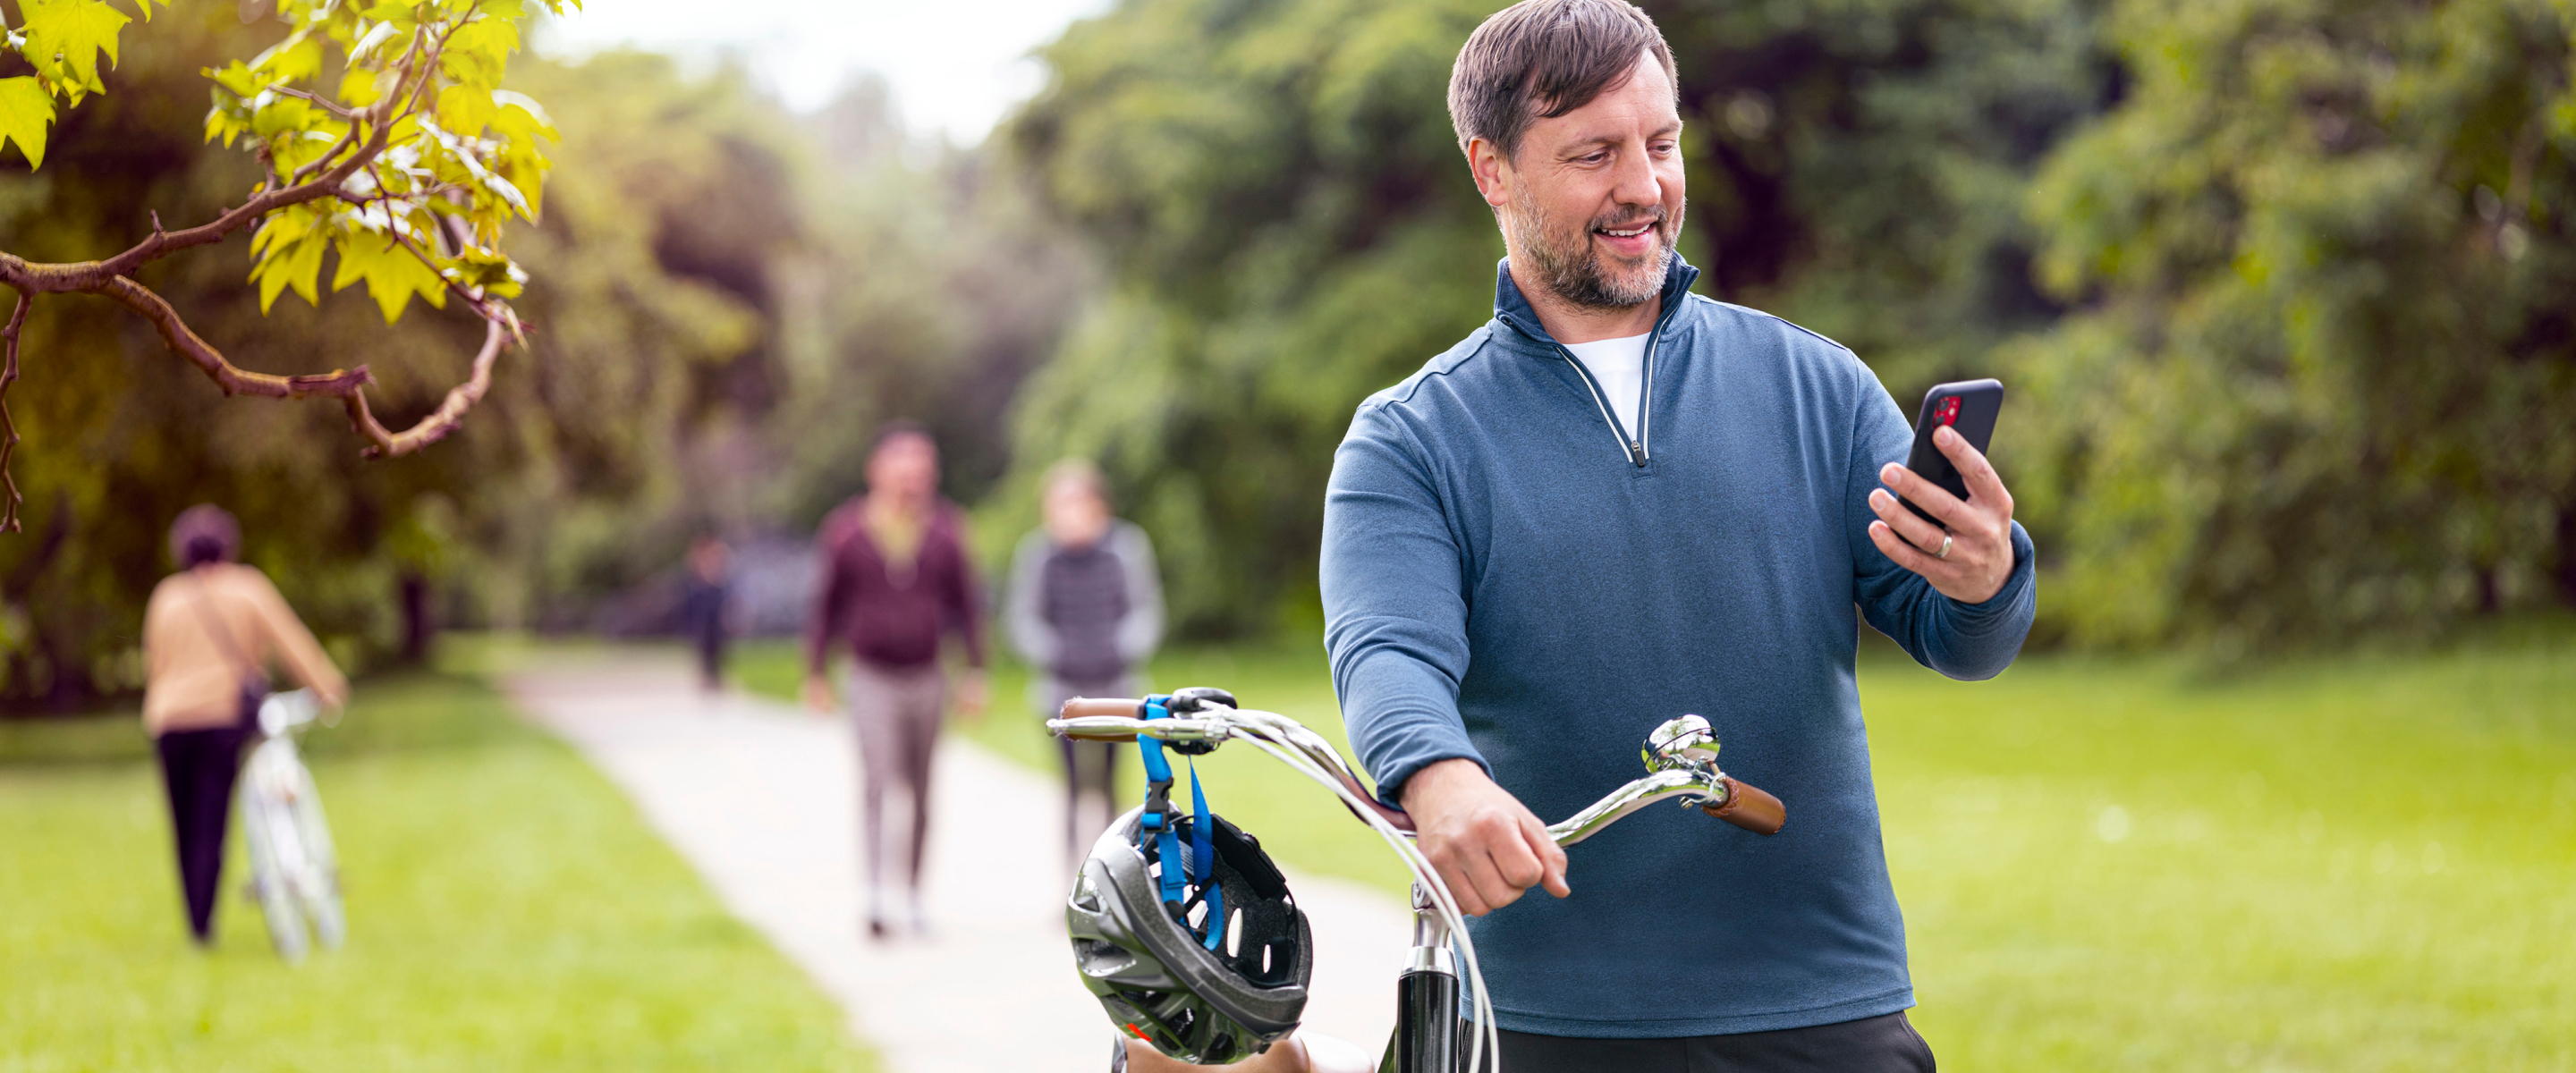 A smiling man in park, standing with bike and holding smartphone, using the TempoSmart App